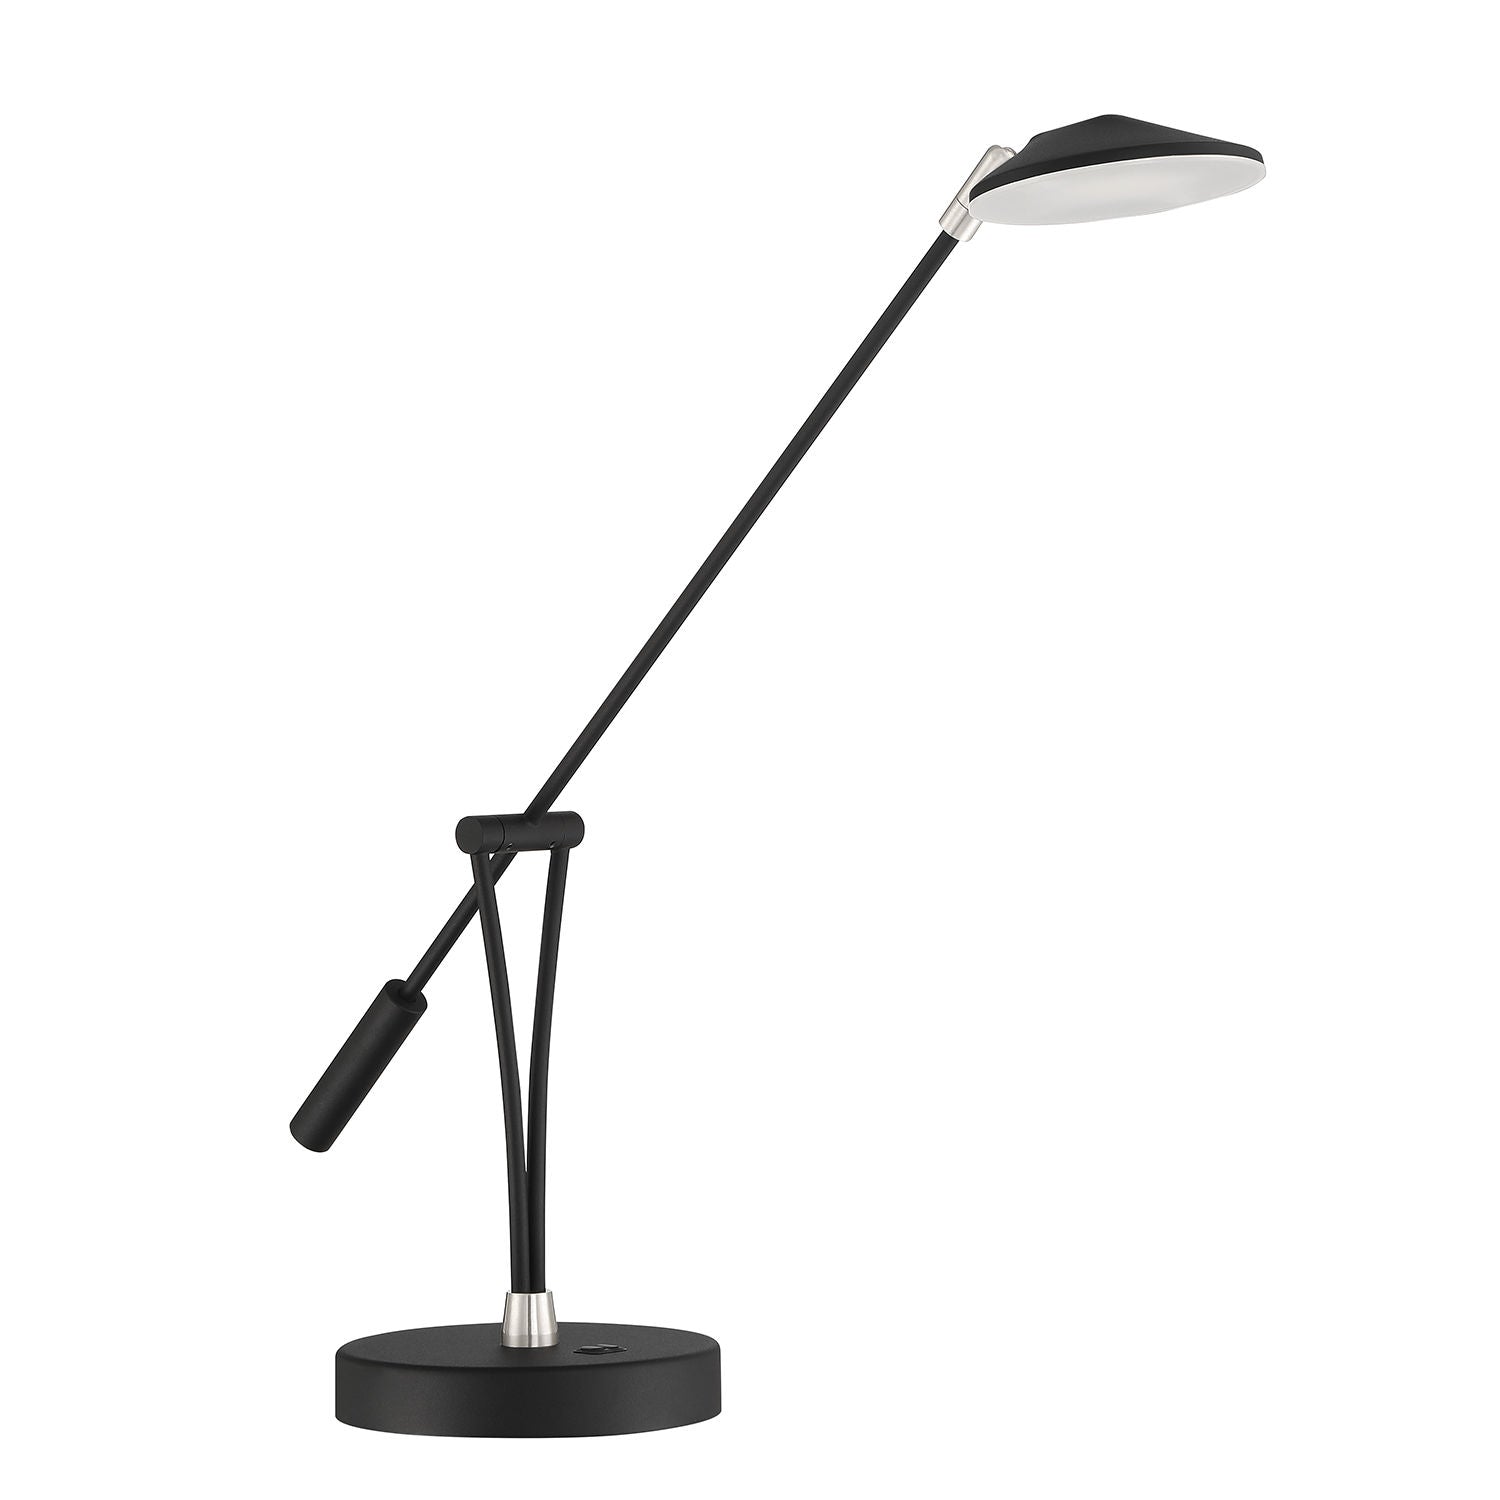 Table lamp Stainless steel, Black INTEGRATED LED - PTL5015-BLK/SN | KENDAL